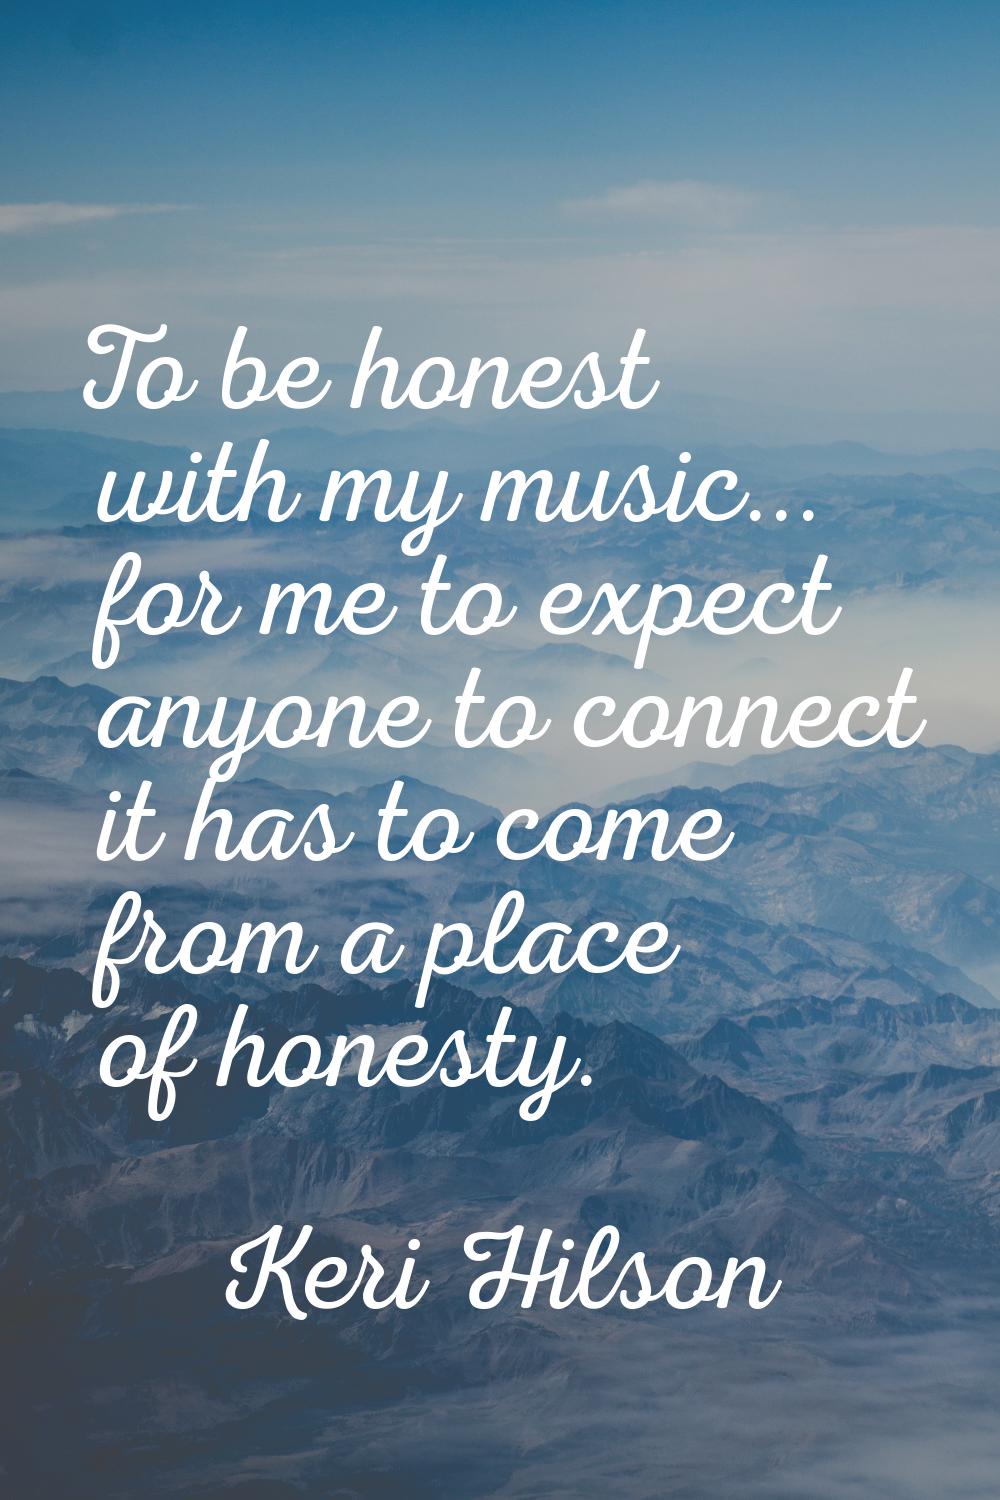 To be honest with my music... for me to expect anyone to connect it has to come from a place of hon